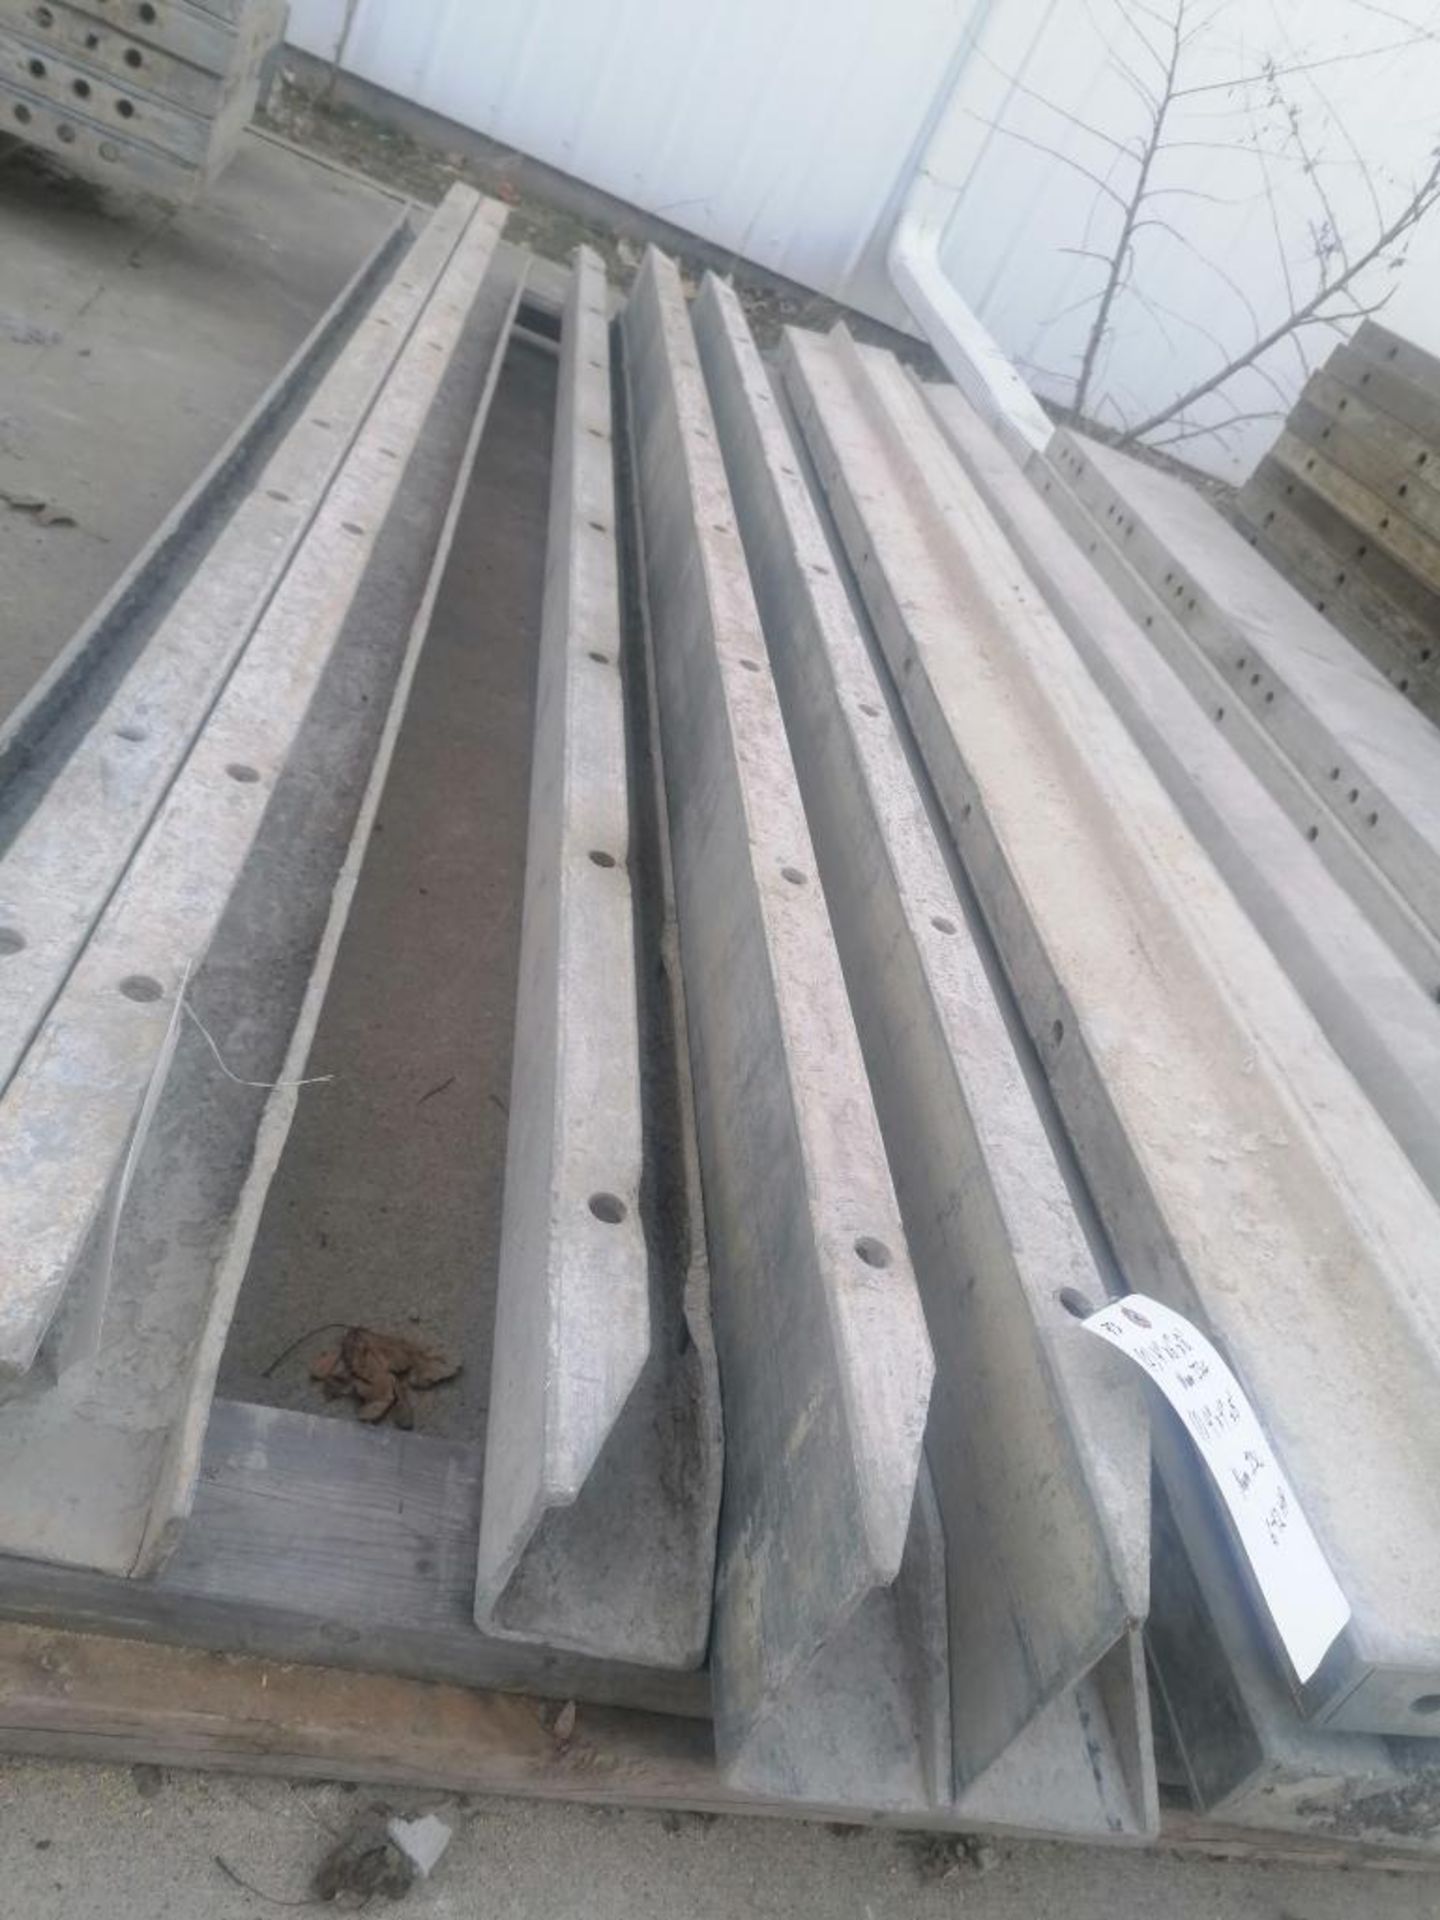 (2) 4" x 6" x 8' & (1) 4" x 4" x 8' Nominal ISC Wall-Ties Smooth Aluminum Concrete Forms 6-12 Hole - Image 2 of 2